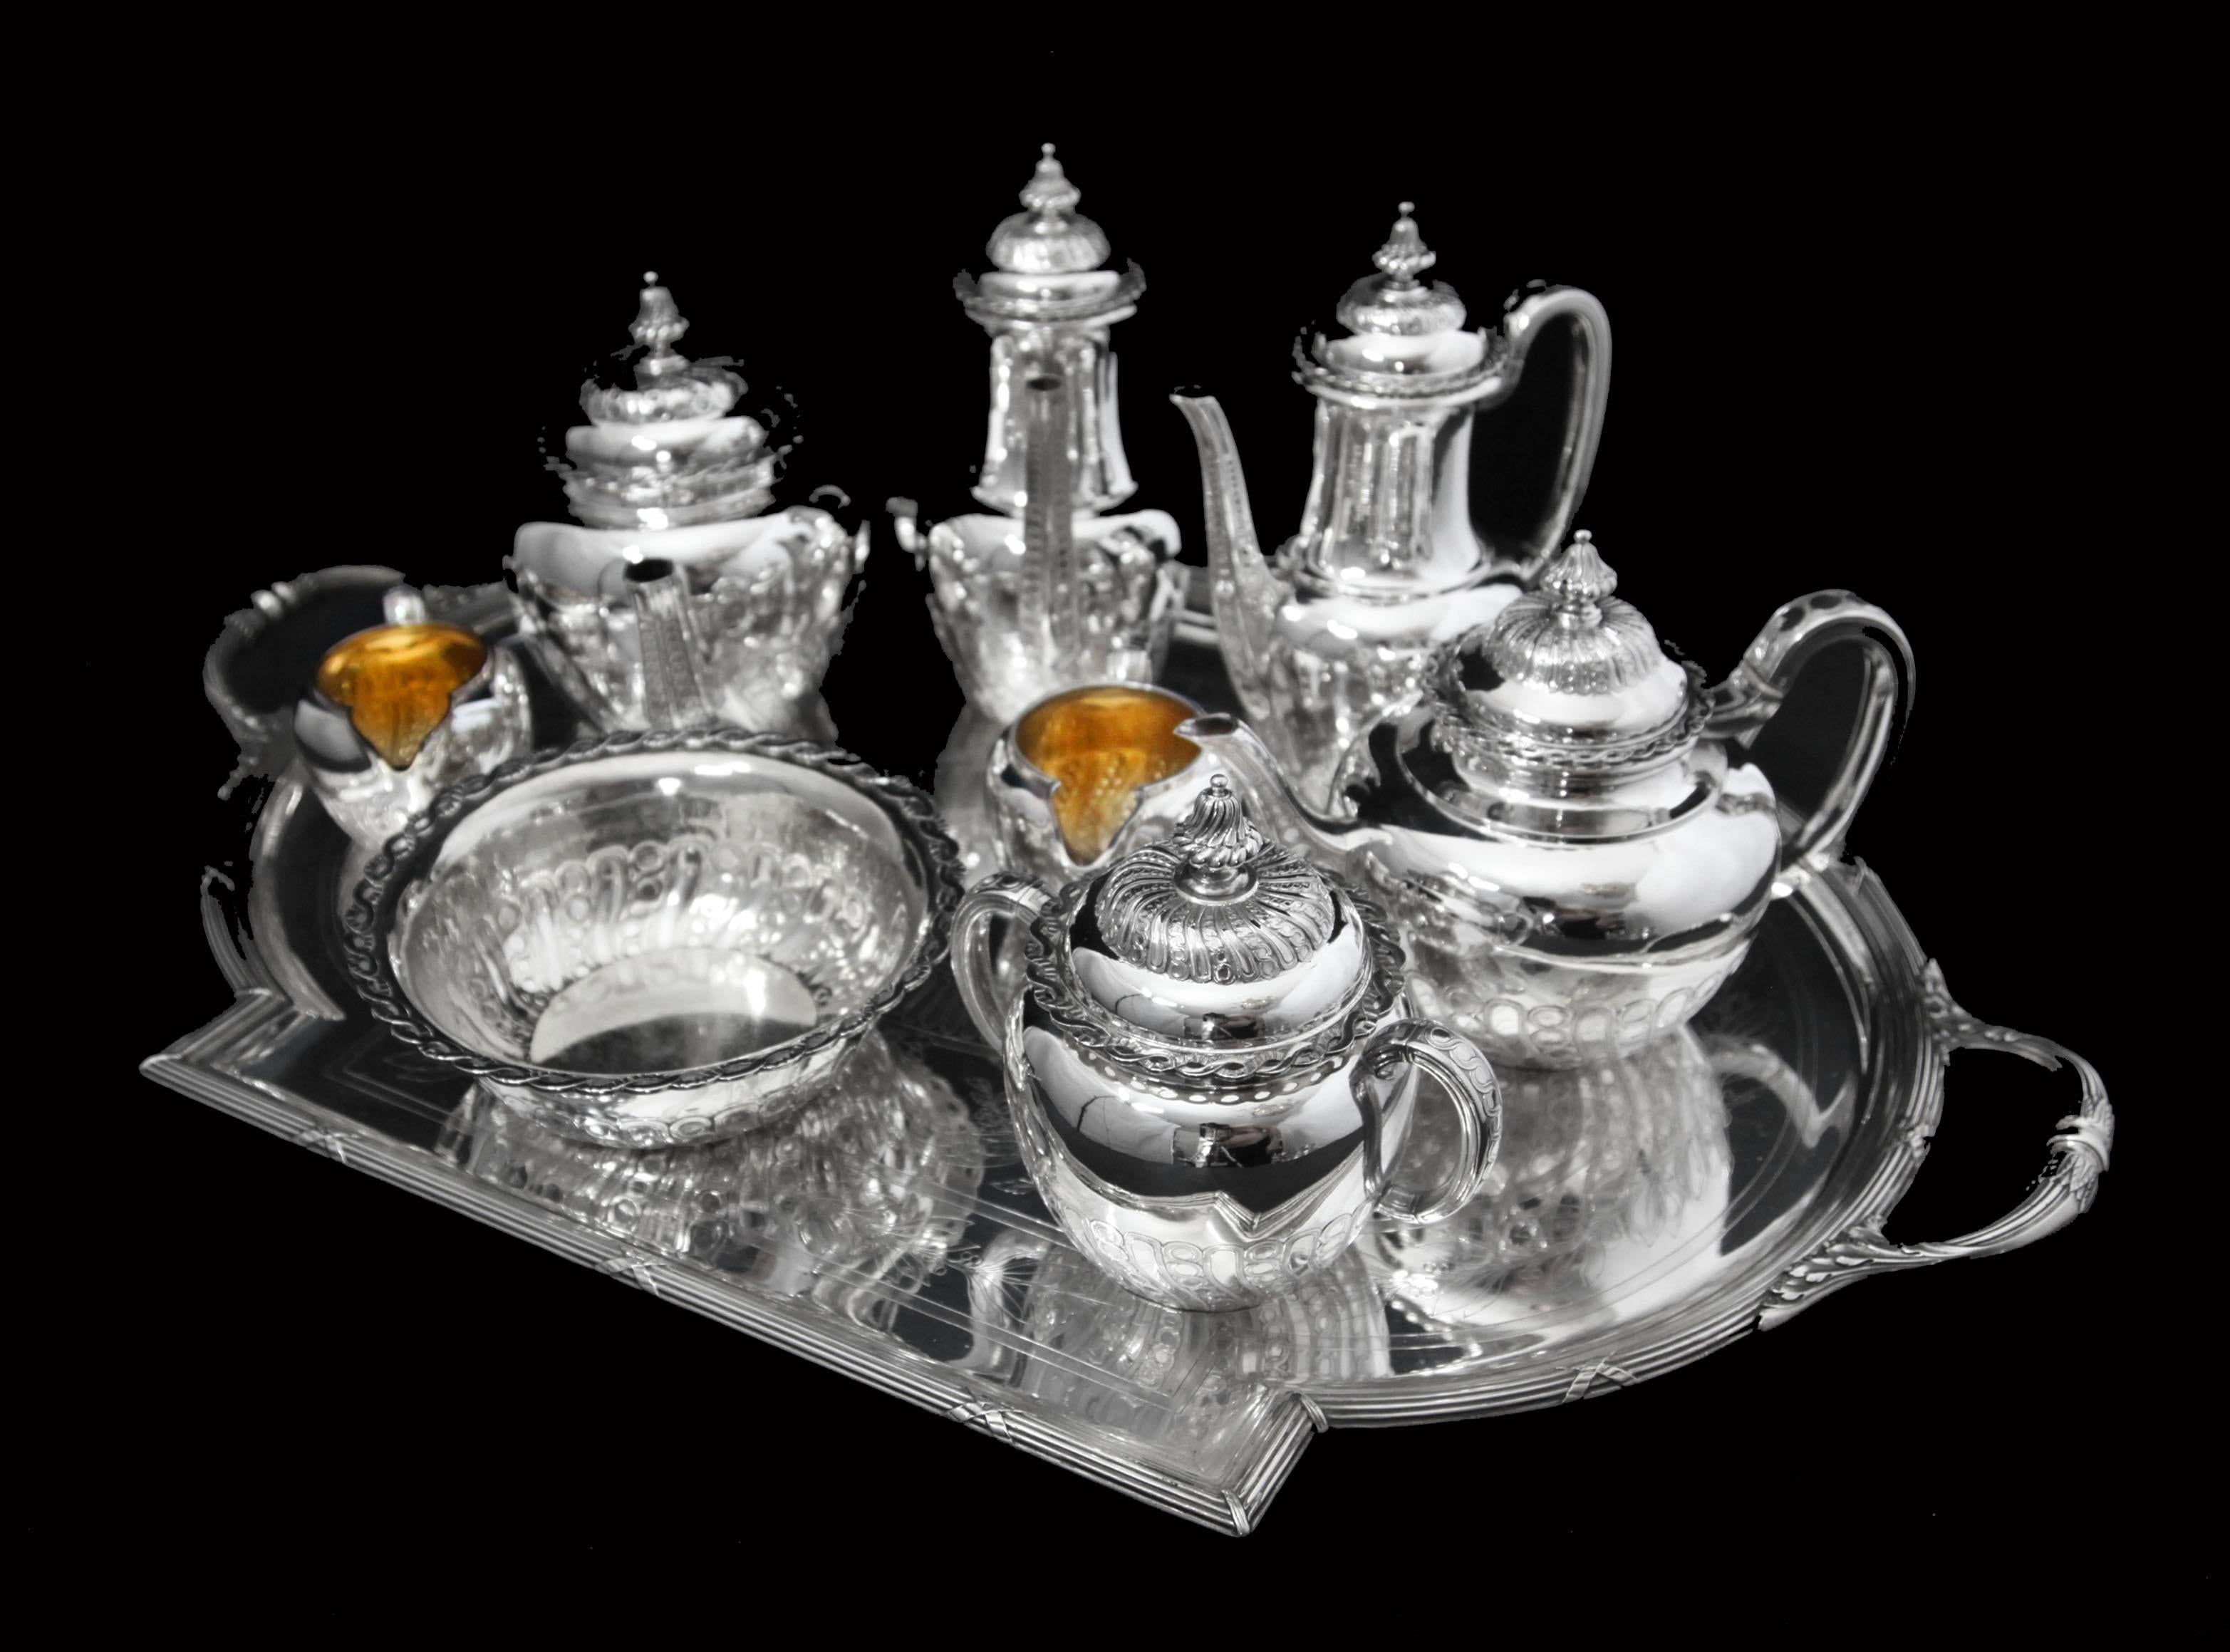 Direct from a Private Mansion in Paris, a Magnificent 9pc. Antique French 950 Sterling Silver Tea Set by the World's Premier French Silversmith Jean-Baptiste Odiot, plus 6 Faberge Imperial Egg Collection Espresso Cups and Saucers in Limoges